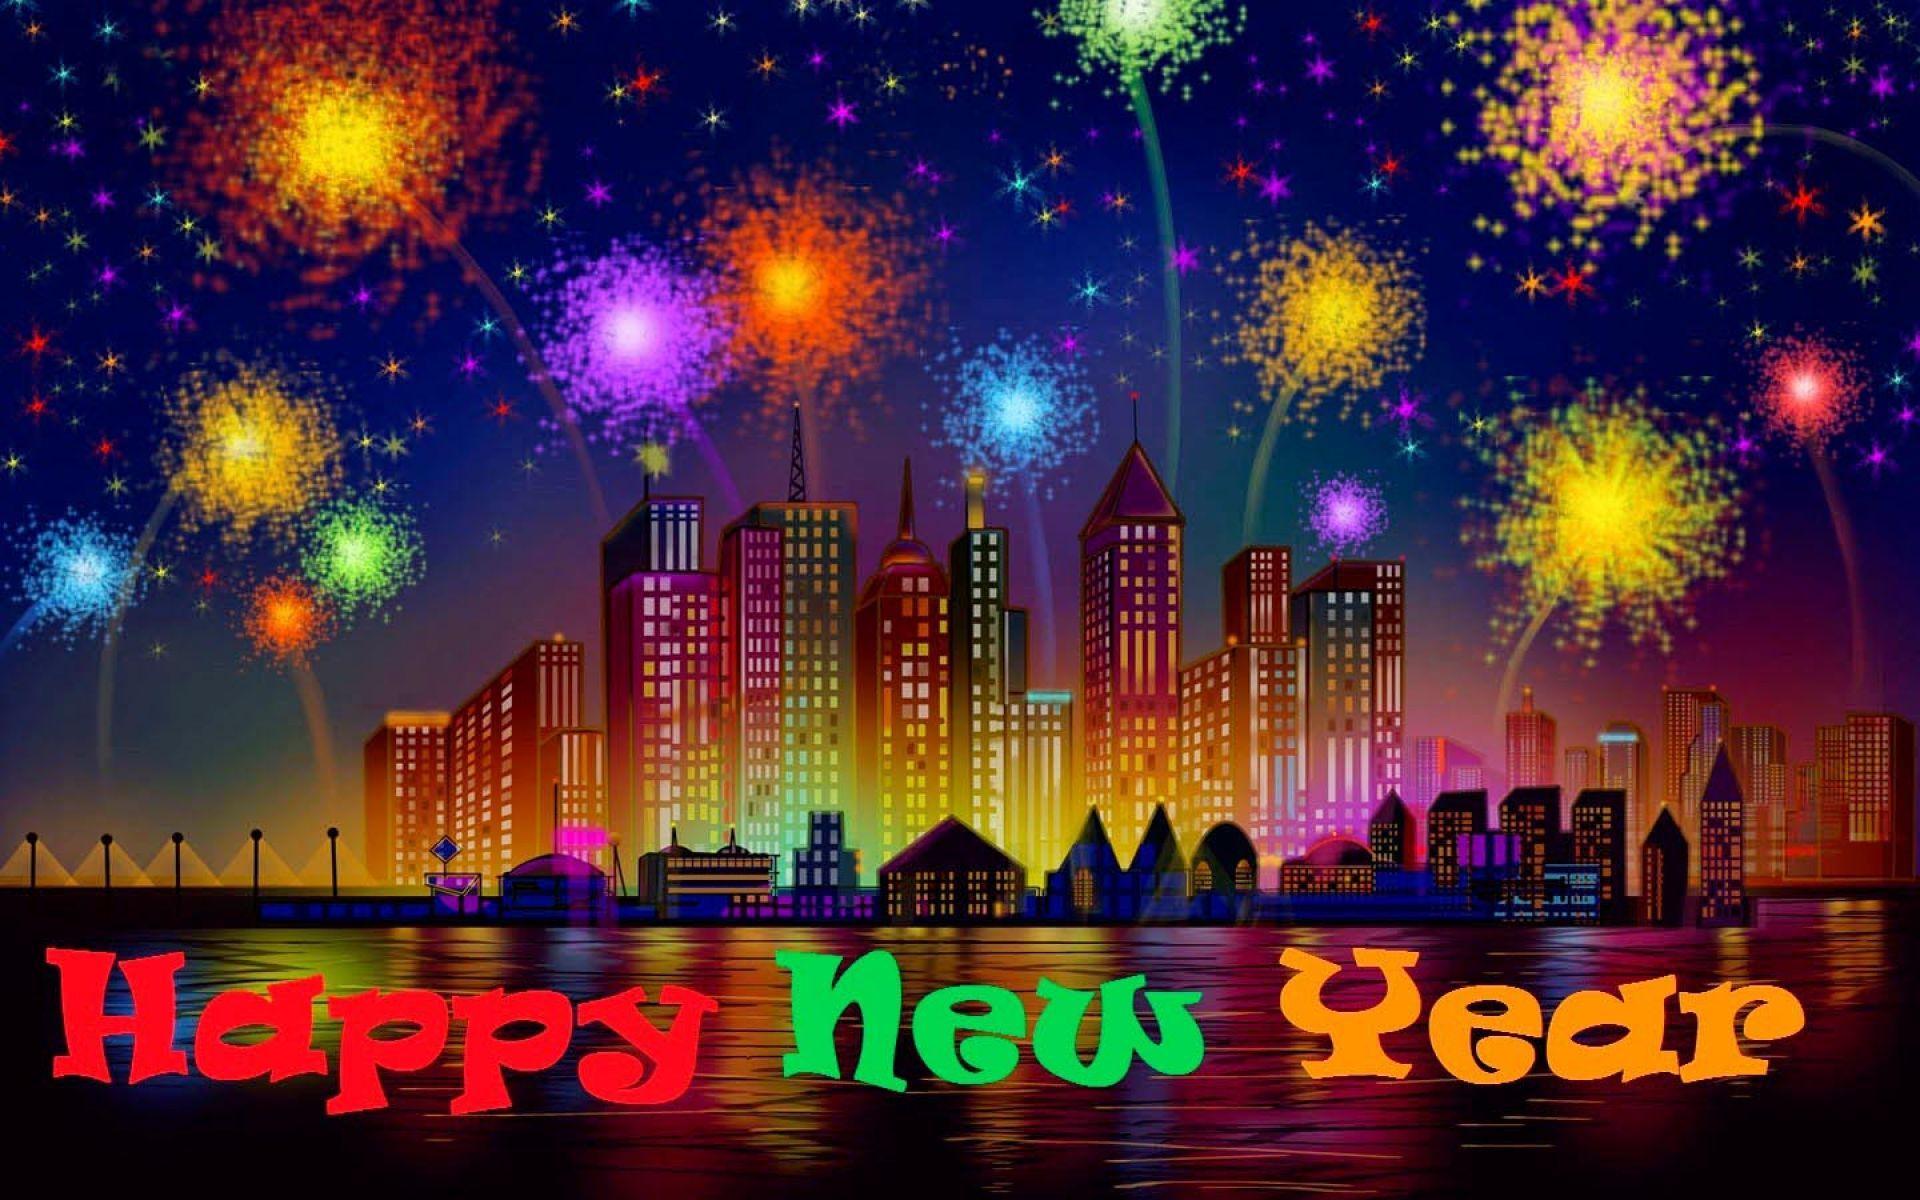 Happy New Year Fireworks Image Wallpaper. HD Happy New Year